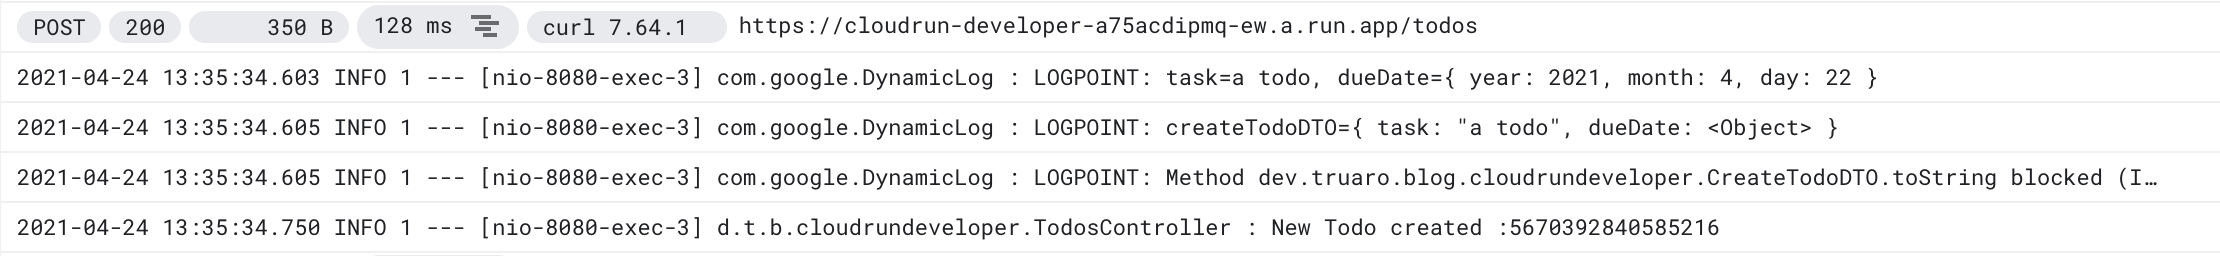 Logpoints output in Cloud Logging service